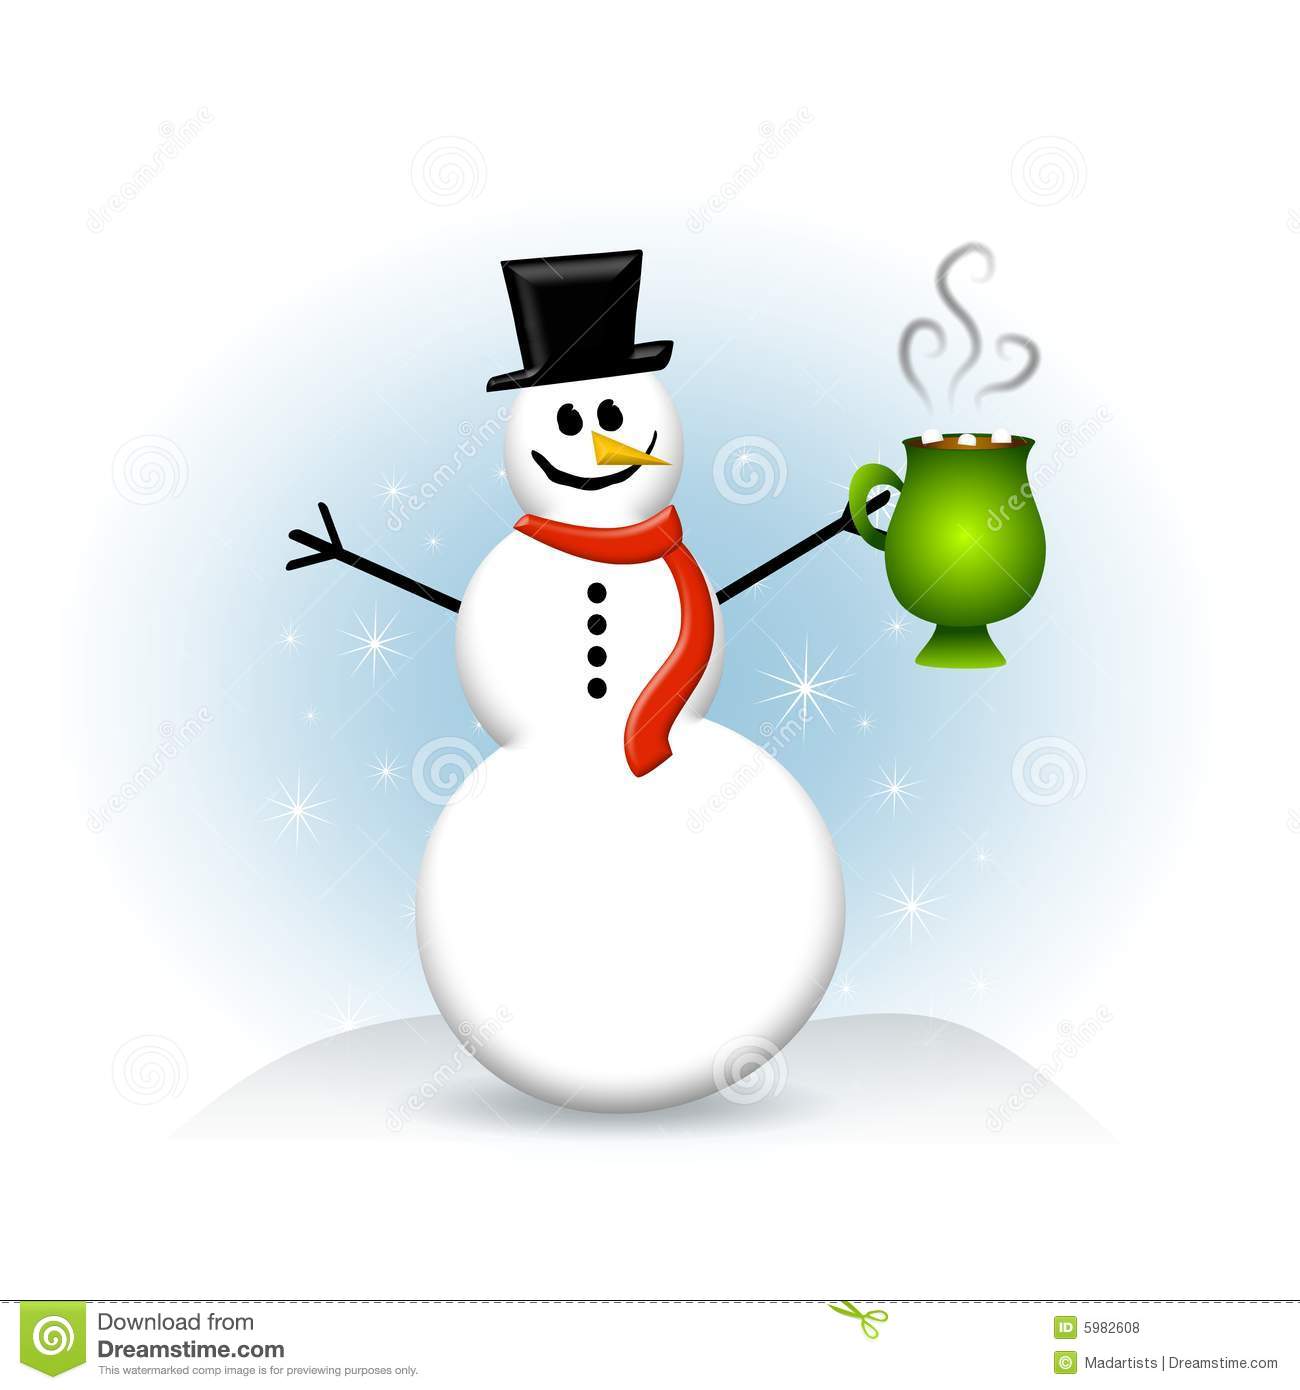 An Illustration Featuring A Snowman Holding A Cup Of Hot Chocolate